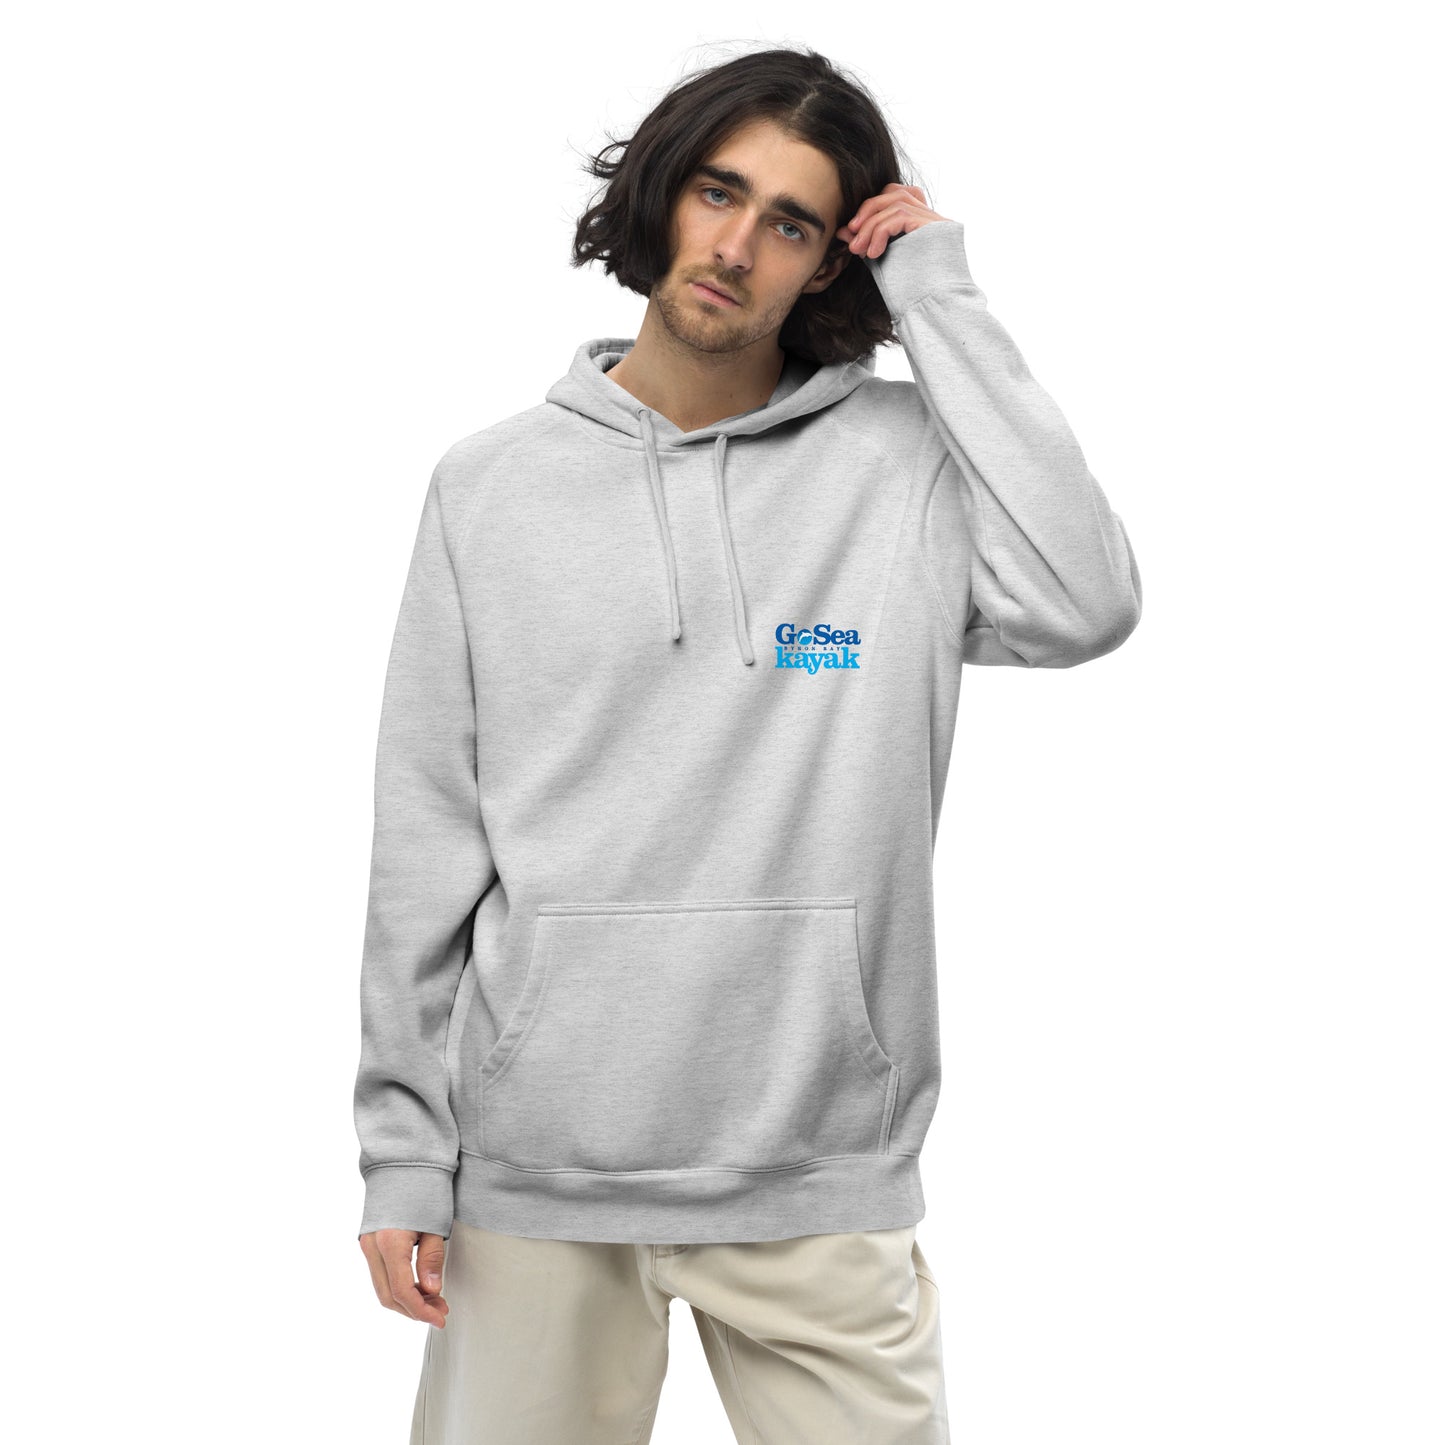  Unisex Hoodie - White Marle / light grey - Front view being warn by man with tucking hair behind his ear - Go Sea Kayak Byron Bay logo on back and front, Kangaroo pocket on front - Genuine Byron Bay Merchandise | Produced by Go Sea Kayak Byron Bay 